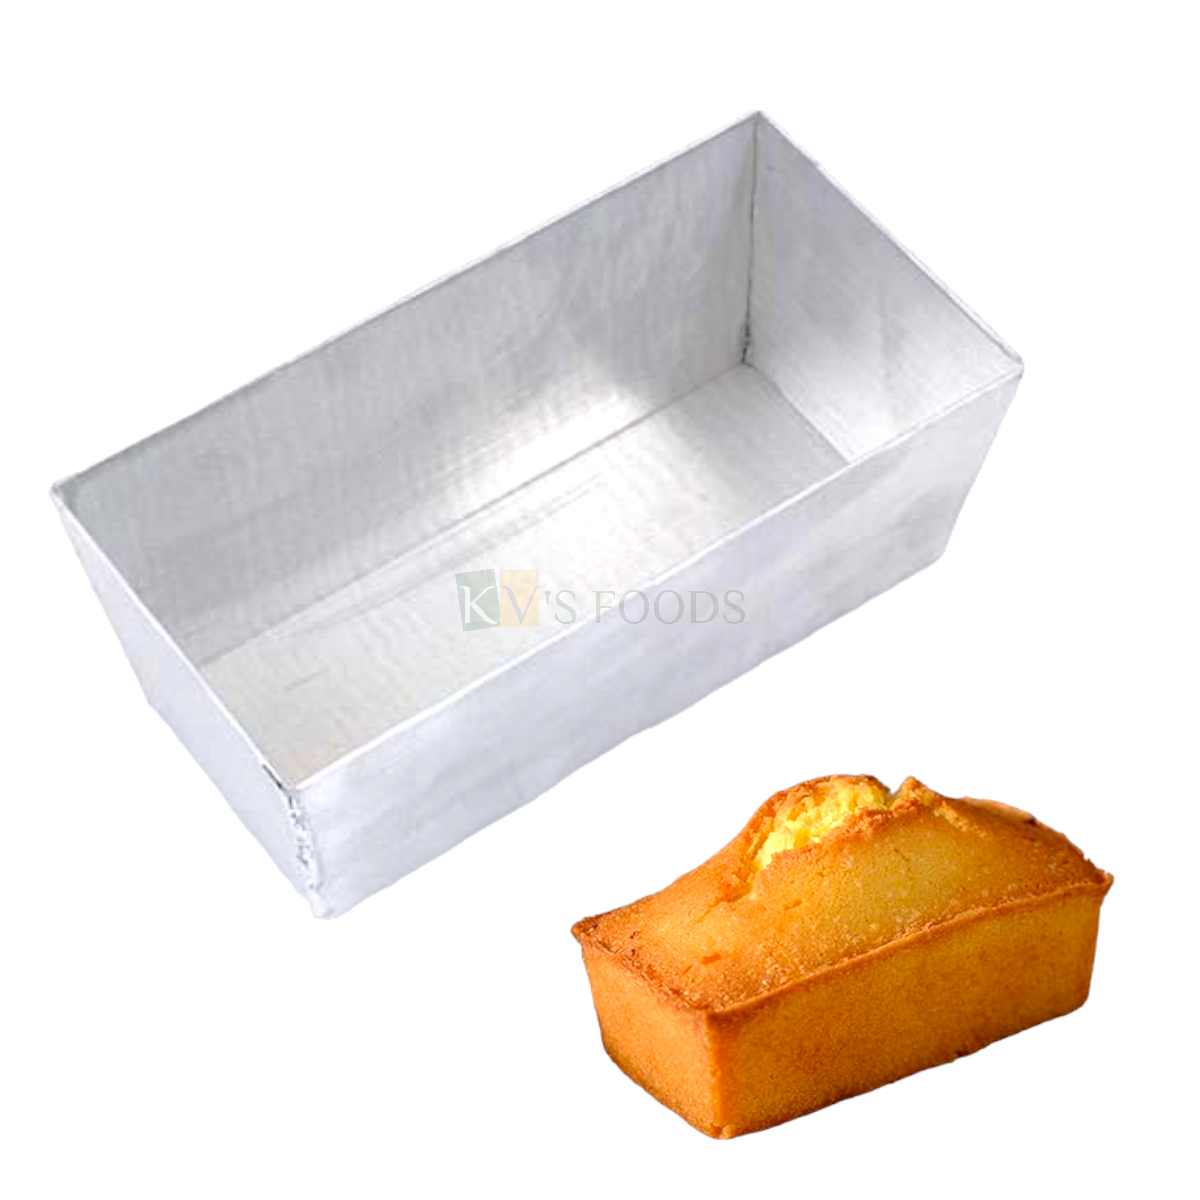 1PC Baking Aluminium Bar Cake Rectangular Mould Panettone Cake Bakeware Pan Mould 150 Gm Size 6x 2.9x2 Inch for Loafs, Bread, Mousse, Pudding Plum Tea Cheese Cakes Chocolate Brownies Mould Tins & Tray